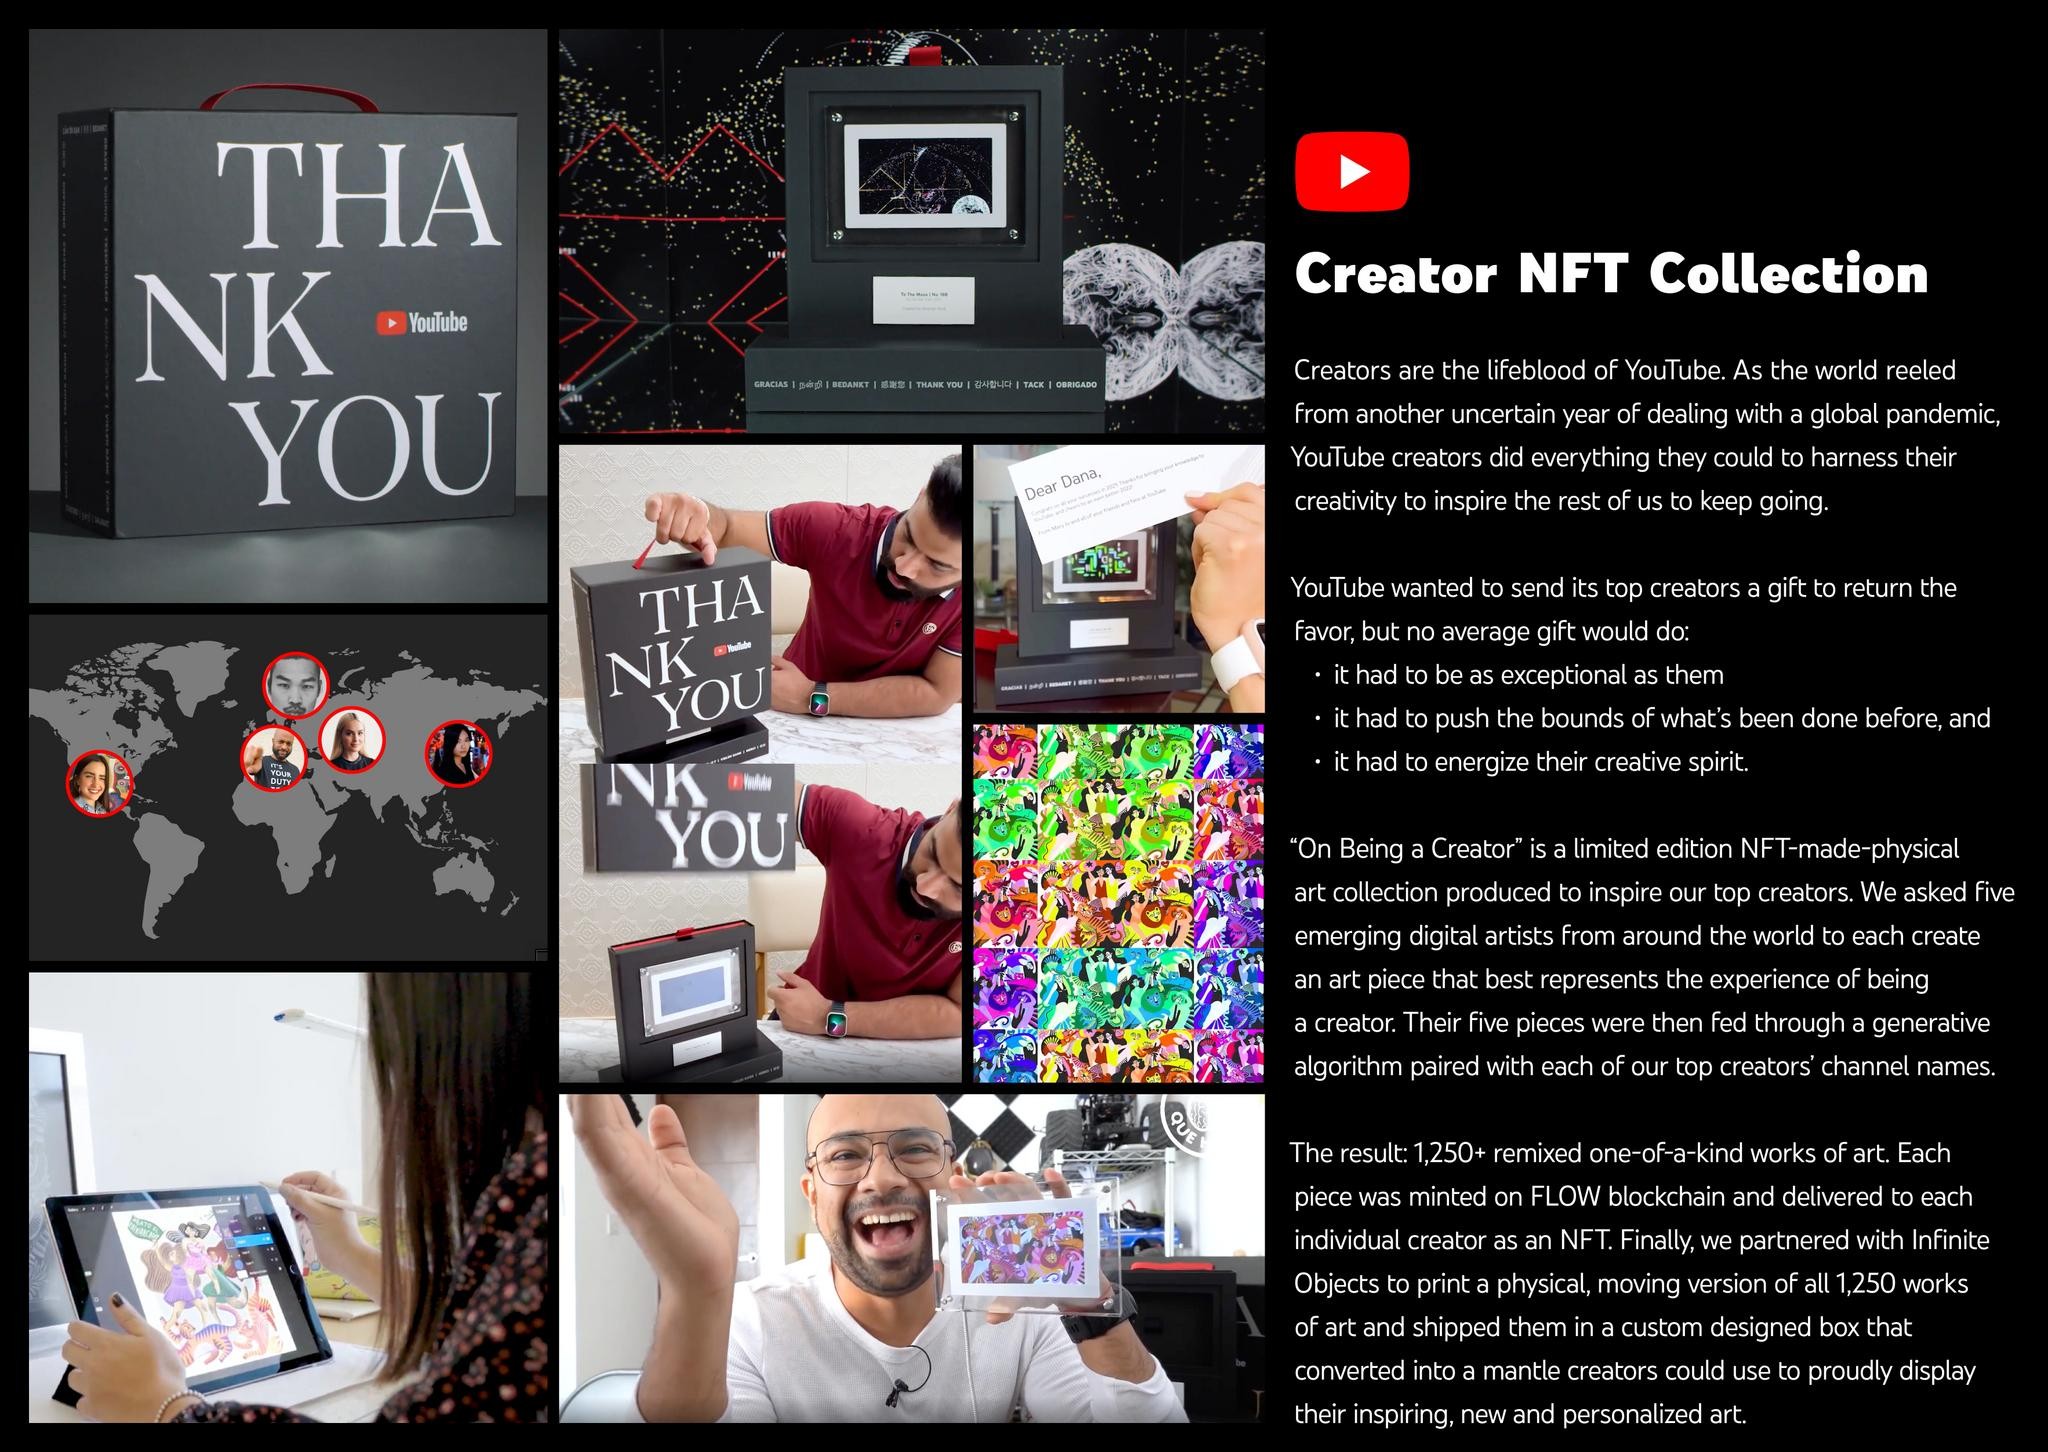 Creator NFT Collection